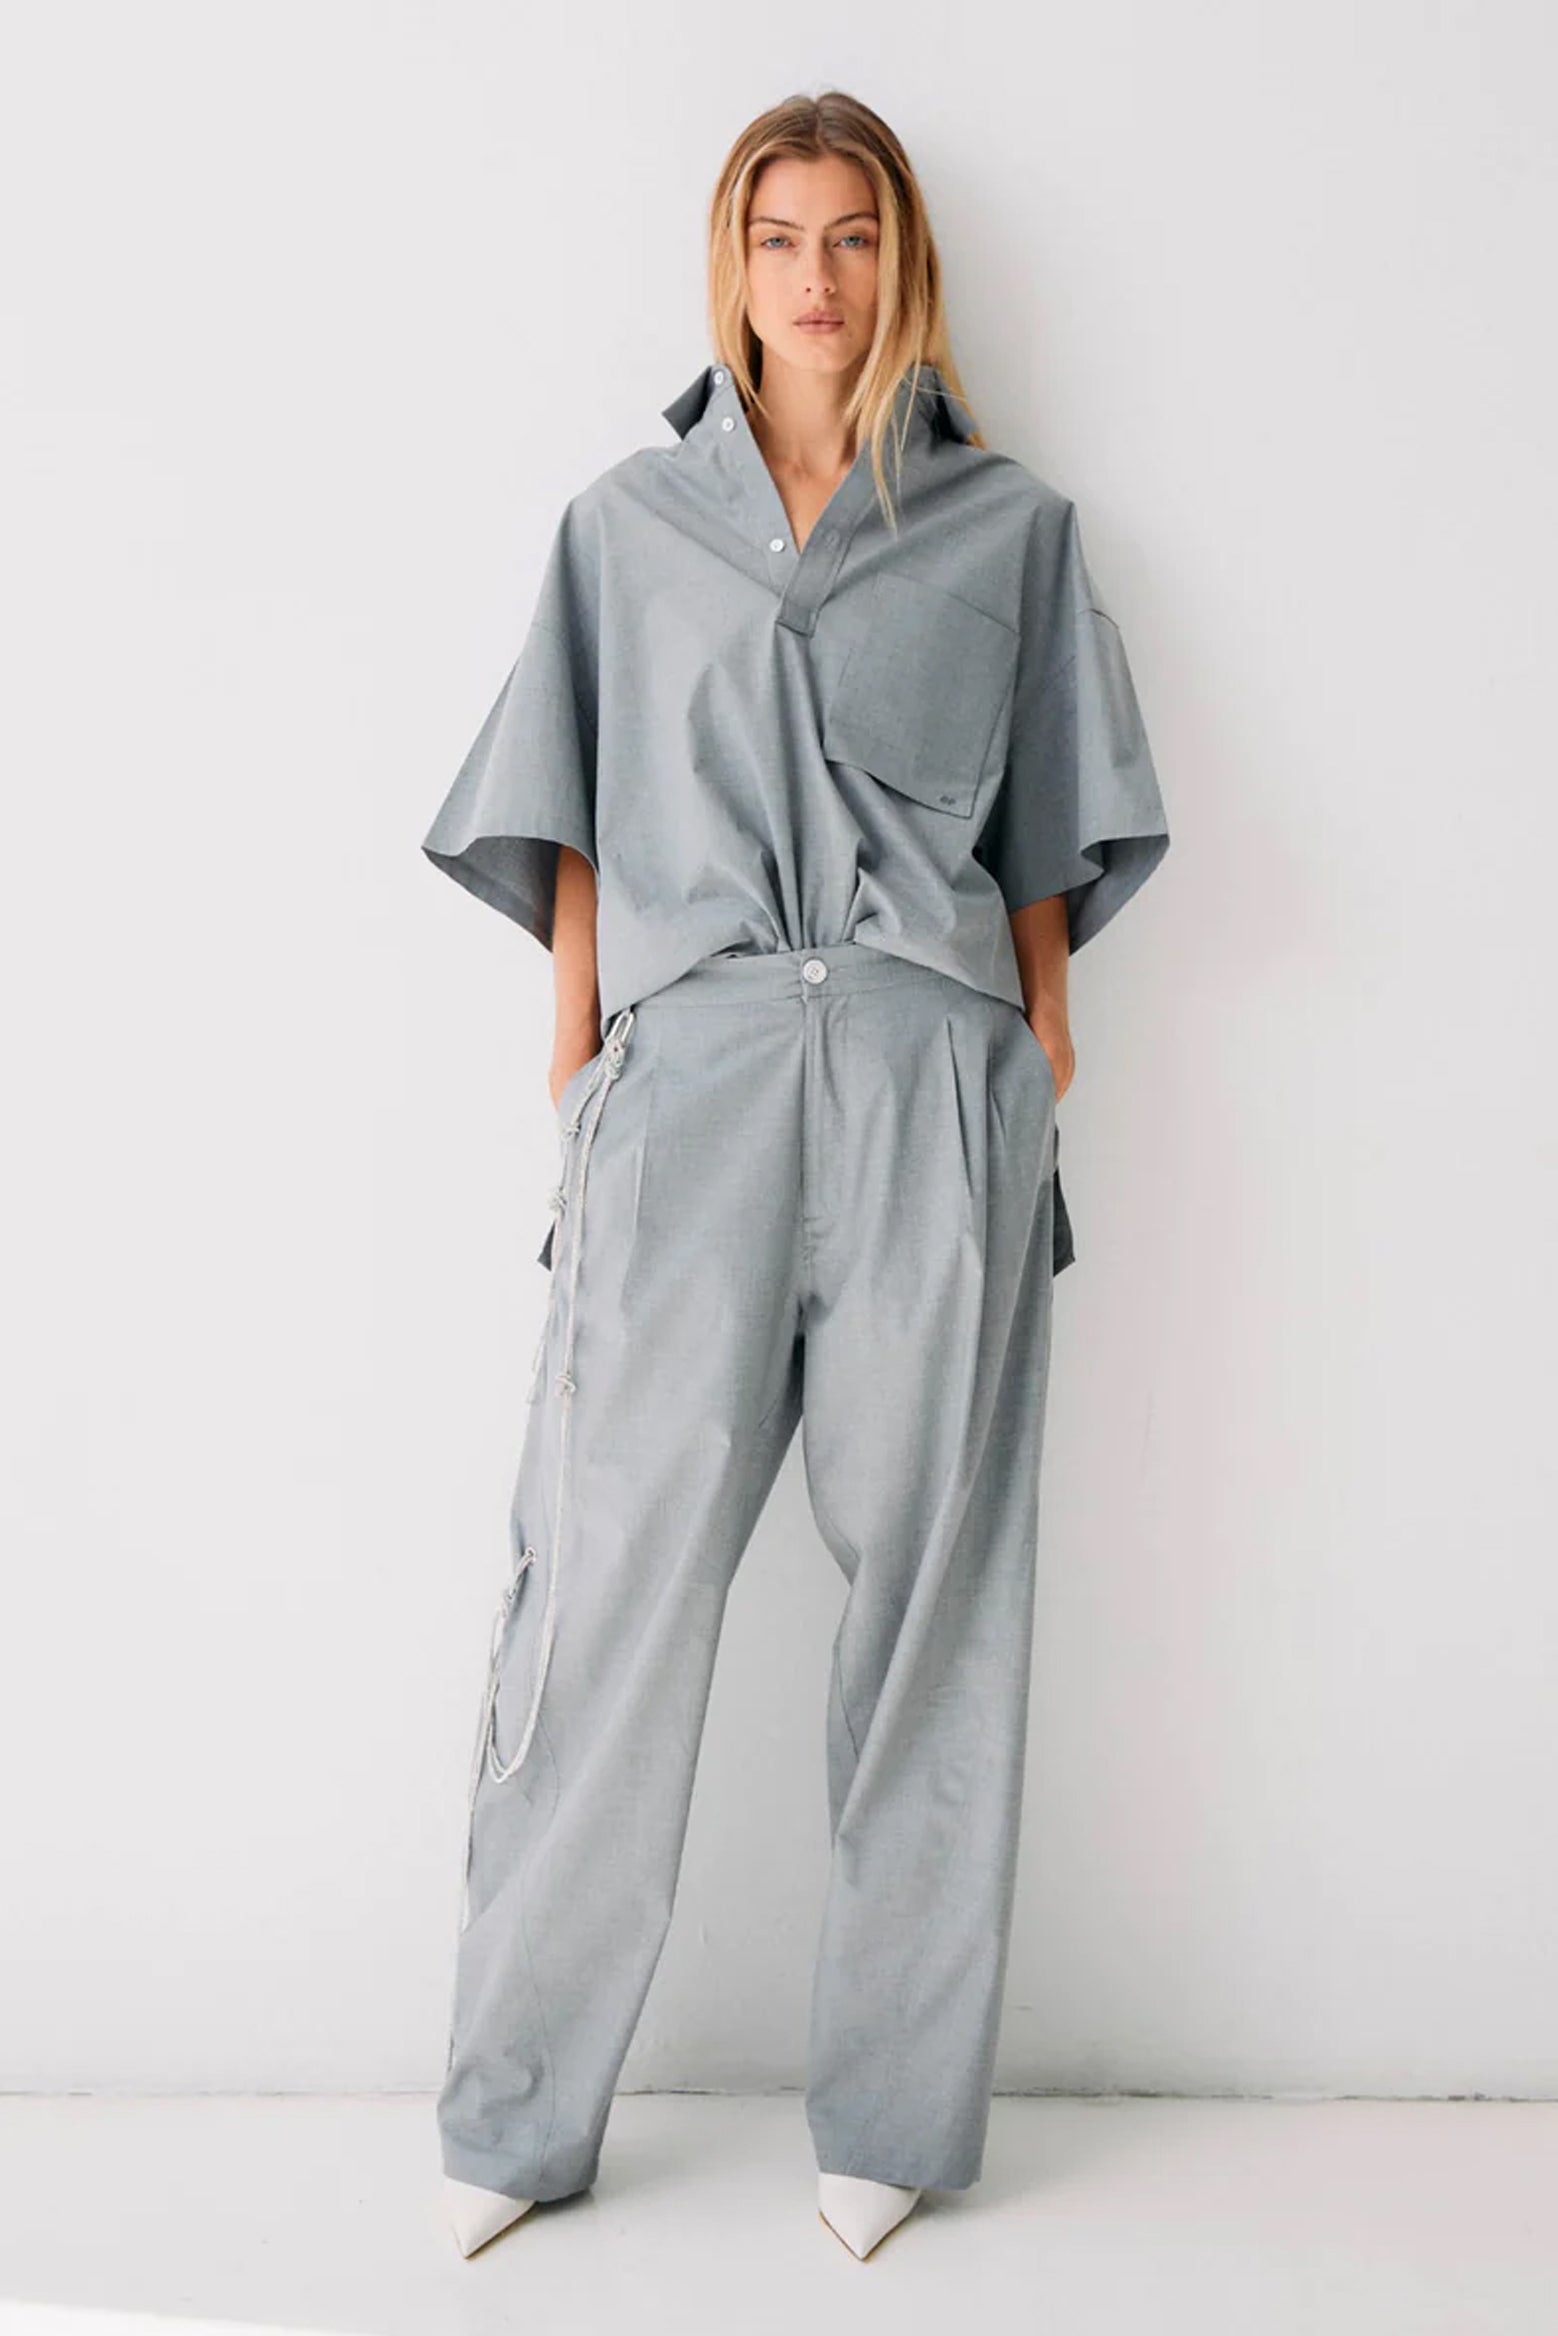 Darkpark Phebe Wide Leg Pants in Grey Melange available at The New Trend Australia. 